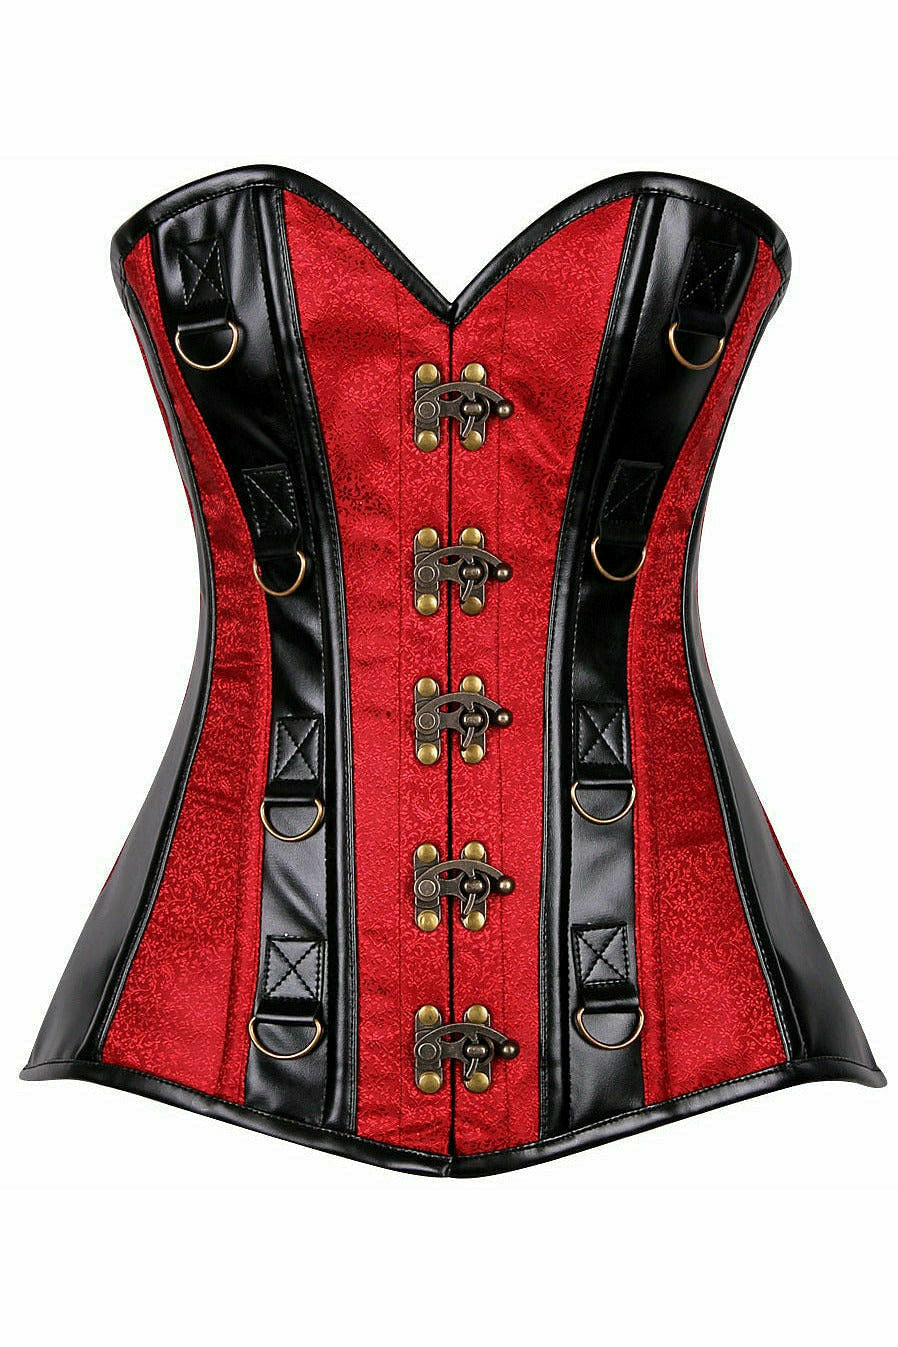 Top Drawer Wine Brocade & Faux Leather Steel Boned Corset - Lust Charm 